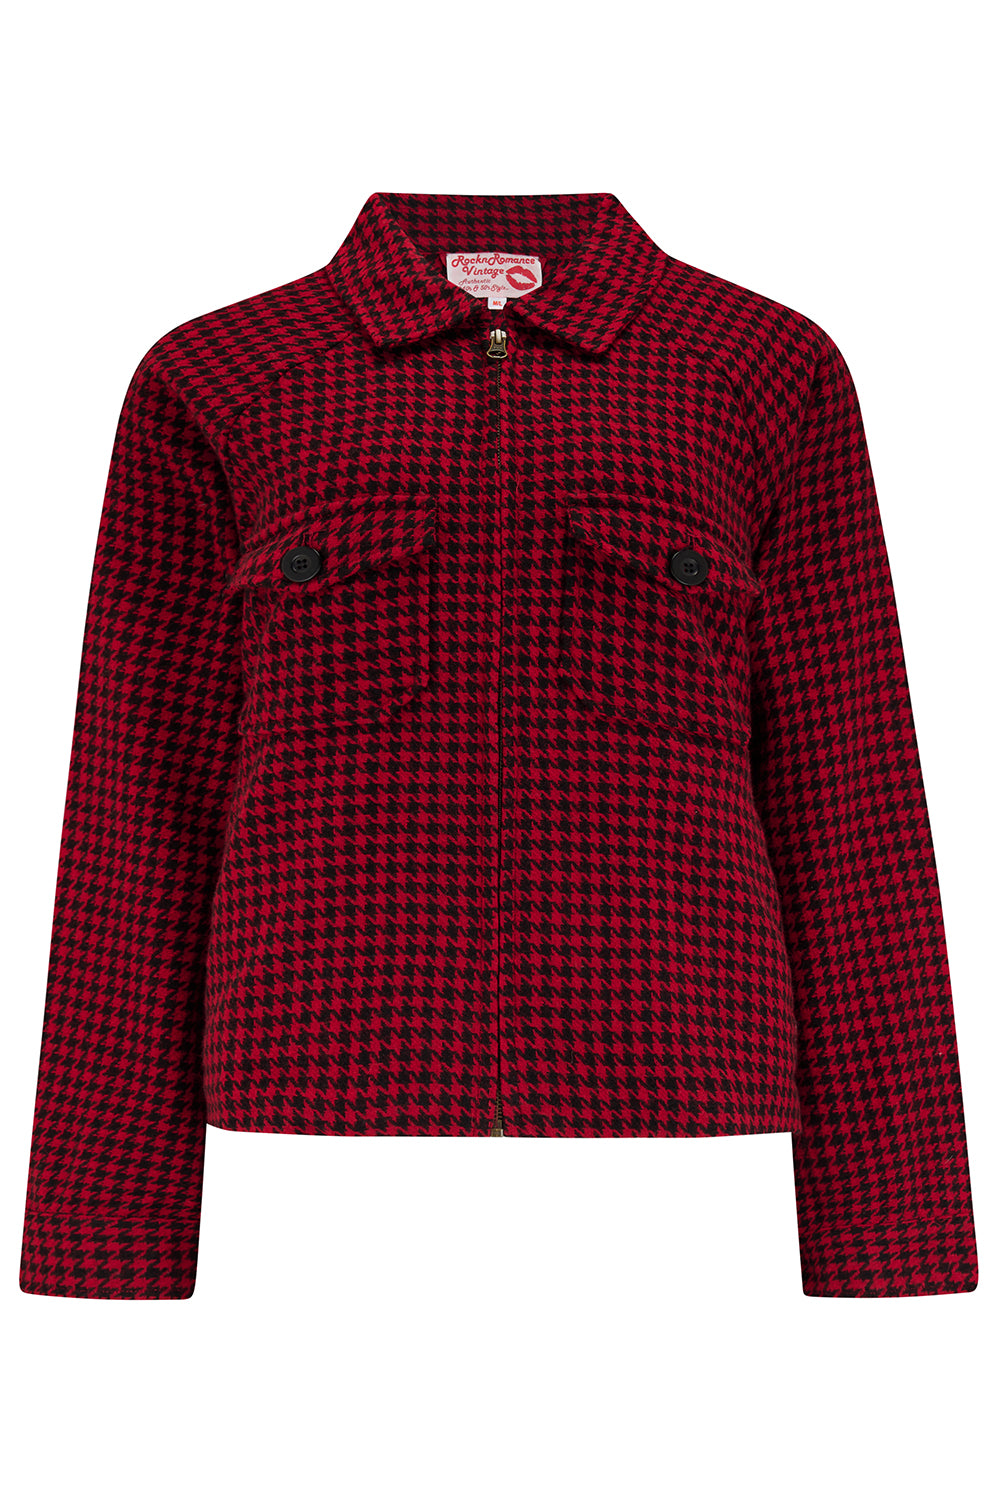 The "Bobby Jacket" in Woven Red Houndstooth Wool With Luxury Satin Lining, Classic Rockabilly Style